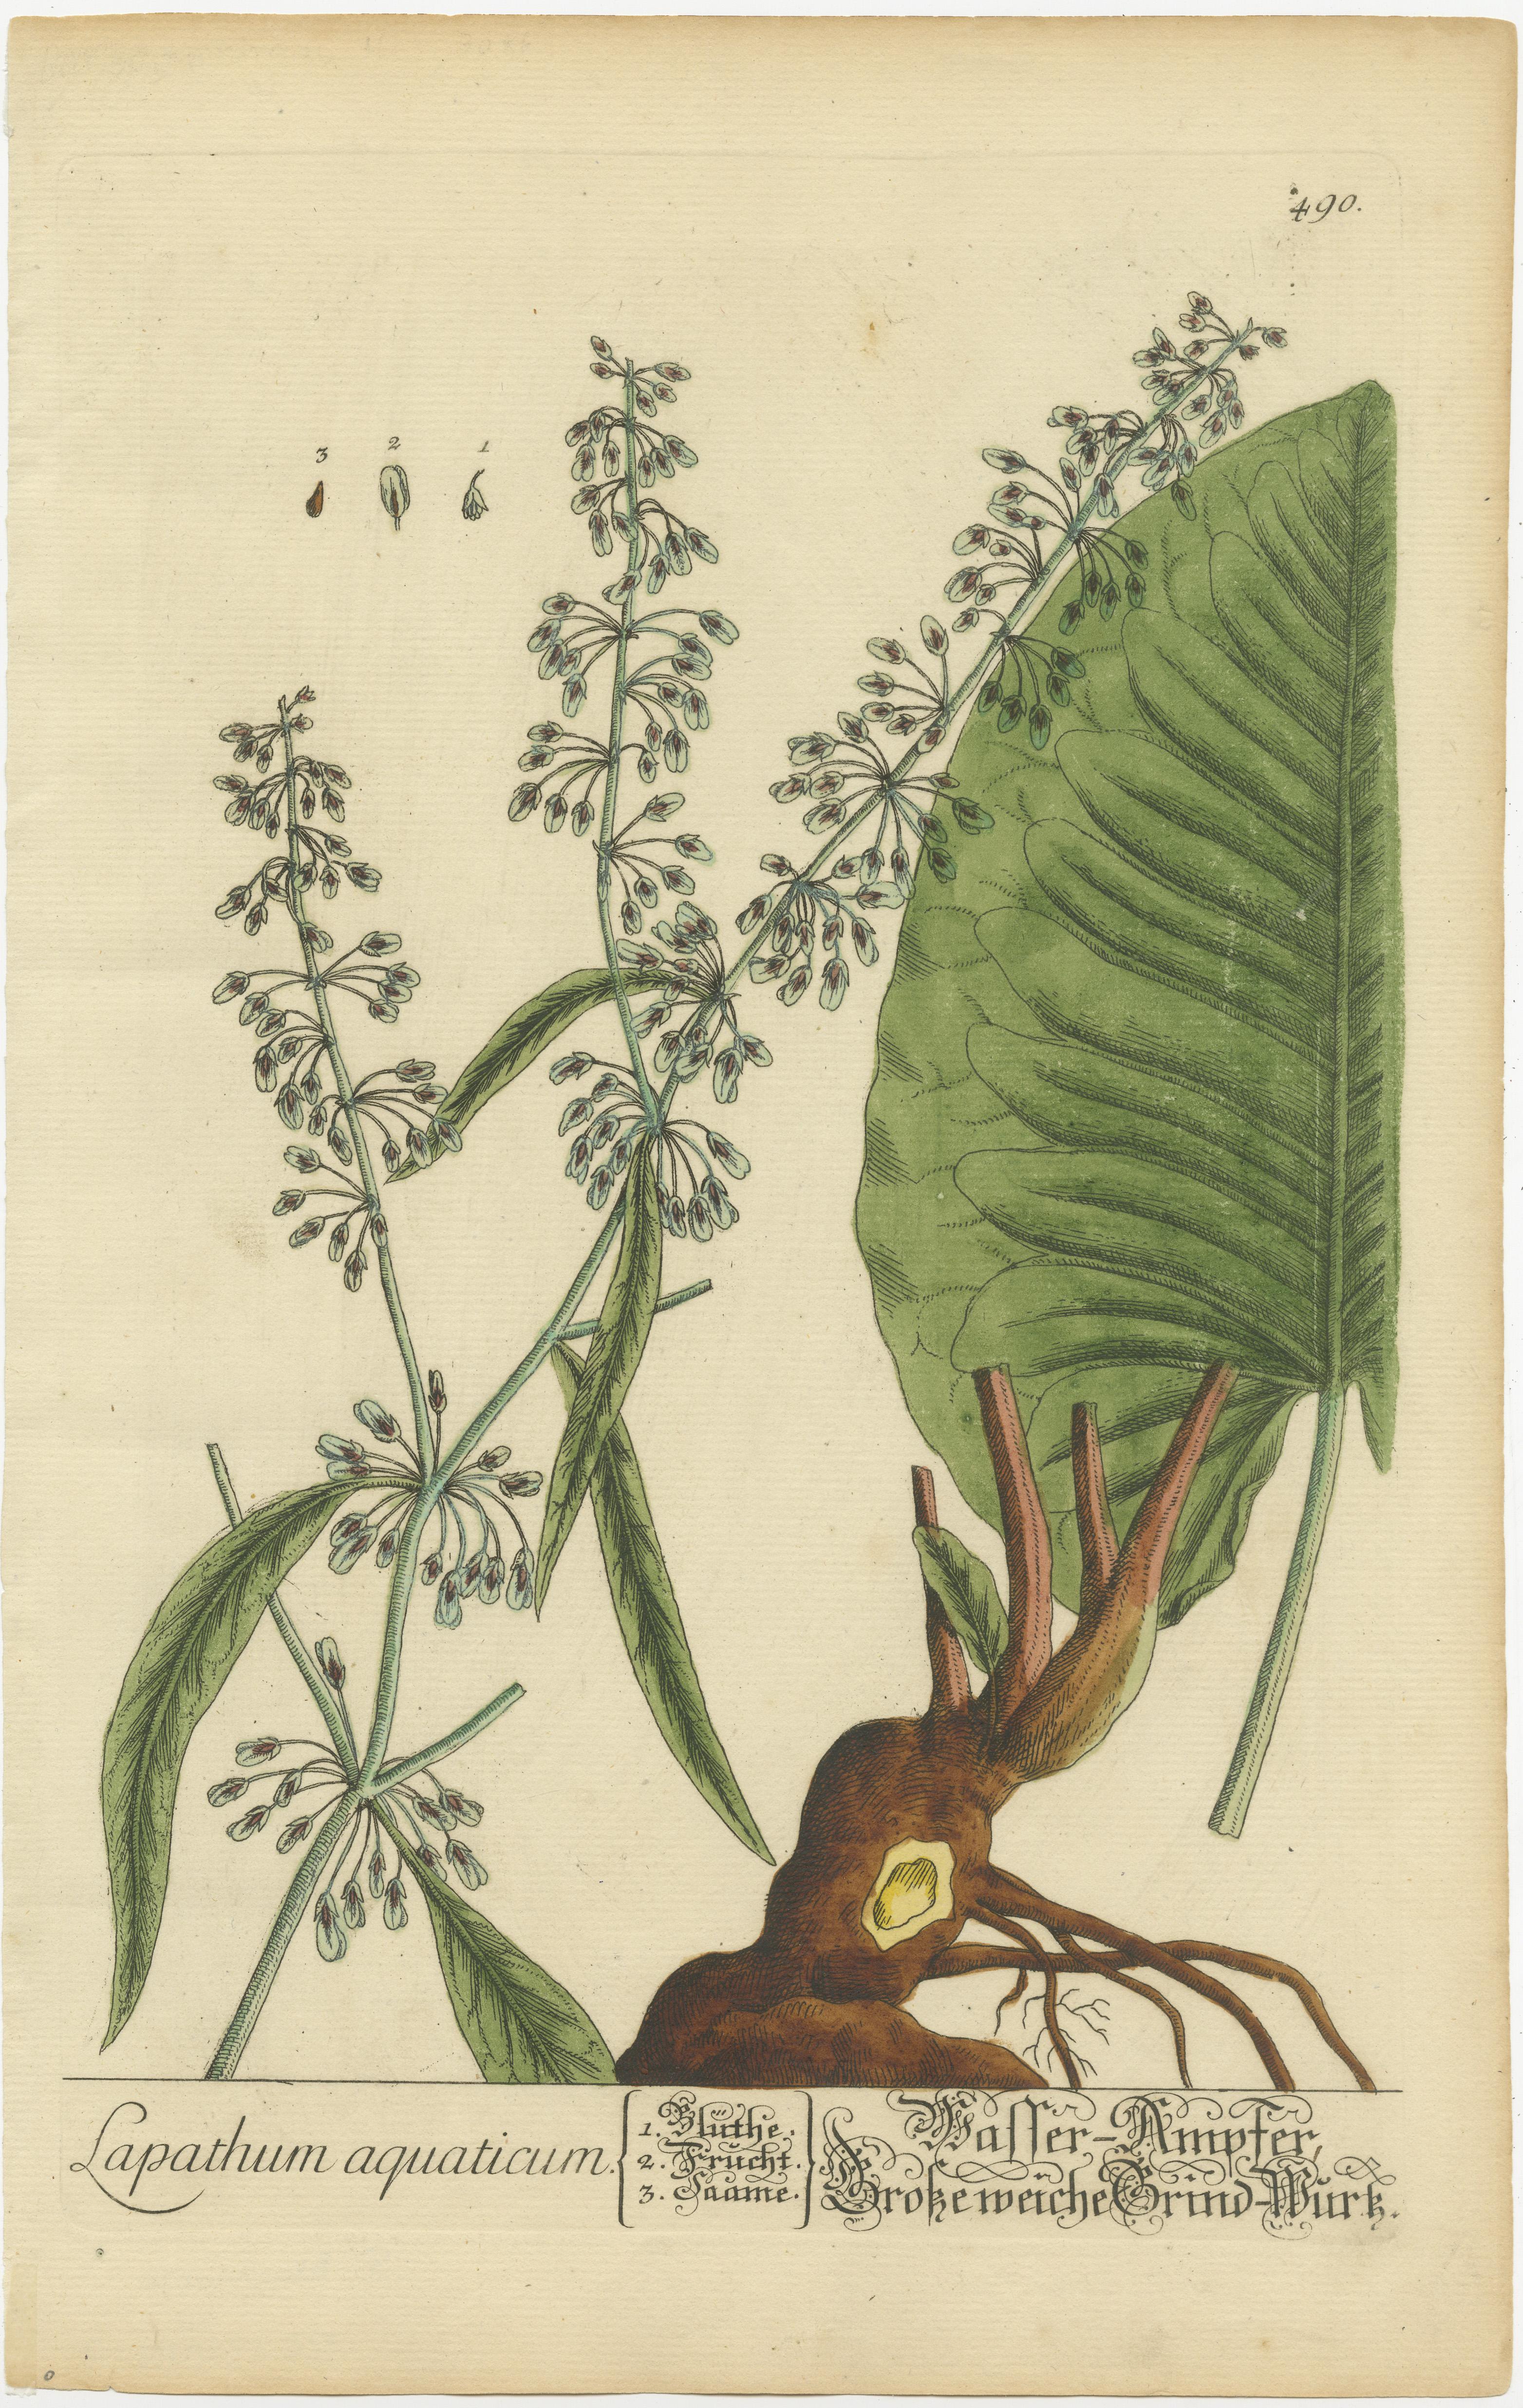 Antique print titled 'Lapathum aquaticum'. Botanical print of rumex aquaticus, a flowering plant in the knotweed family. Published by or after Elisabeth Blackwell, circa 1750. 